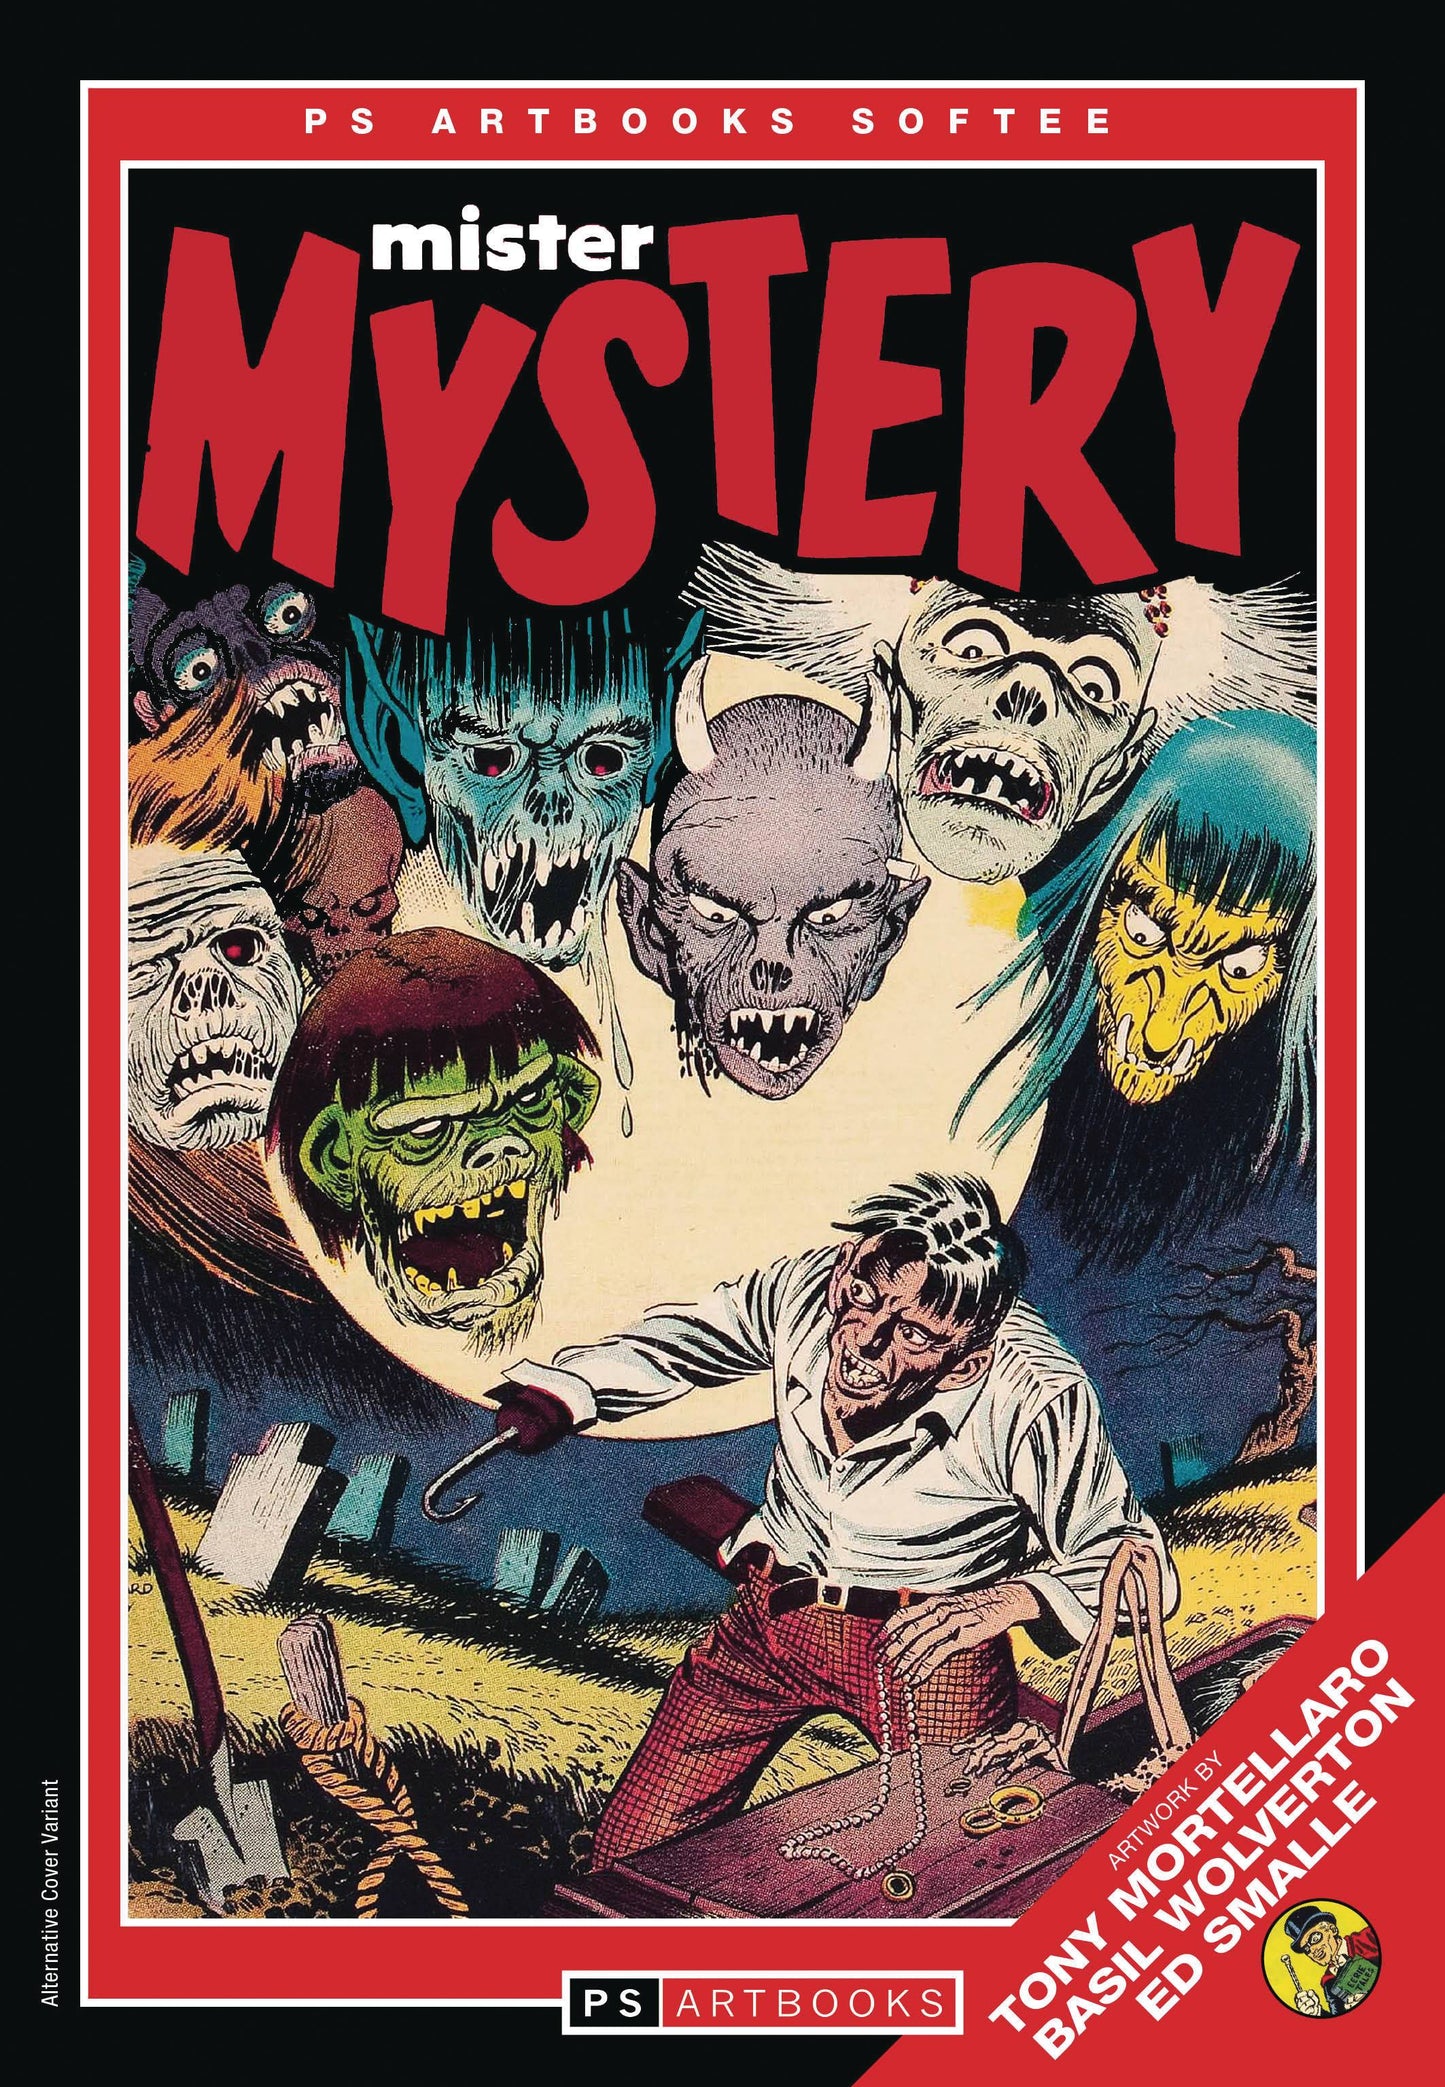 The One Stop Shop Comics & Games Pre Code Classics Mister Mystery Softee Vol 02 (C: 0-1-1) (3/29/2023) PS ARTBOOKS